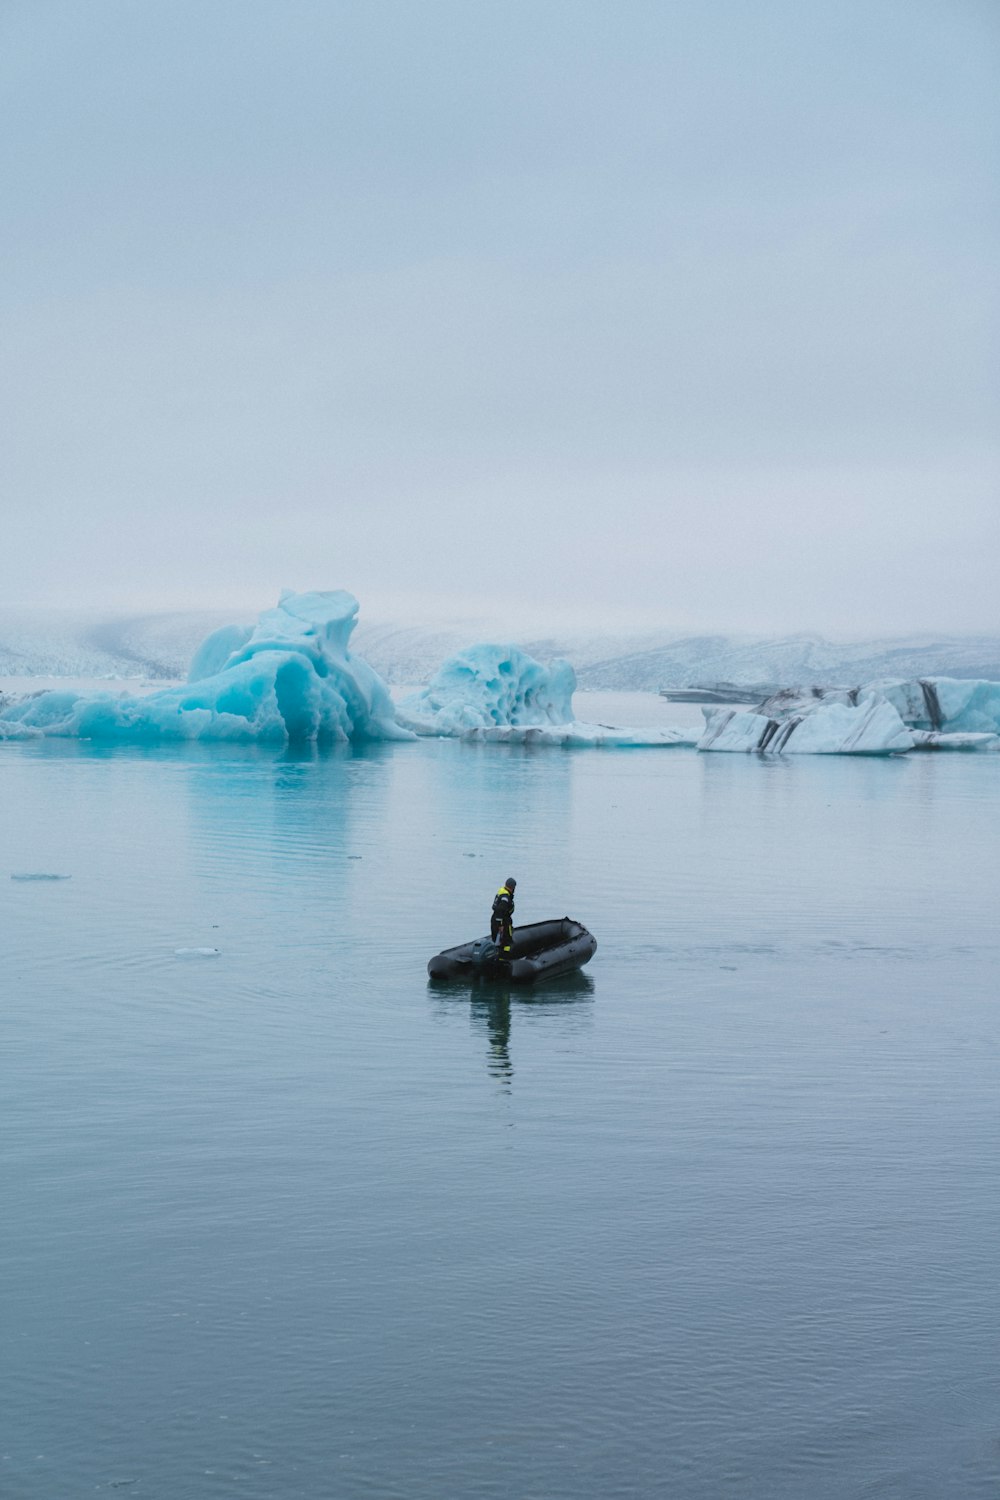 a man on a boat in the water near icebergs